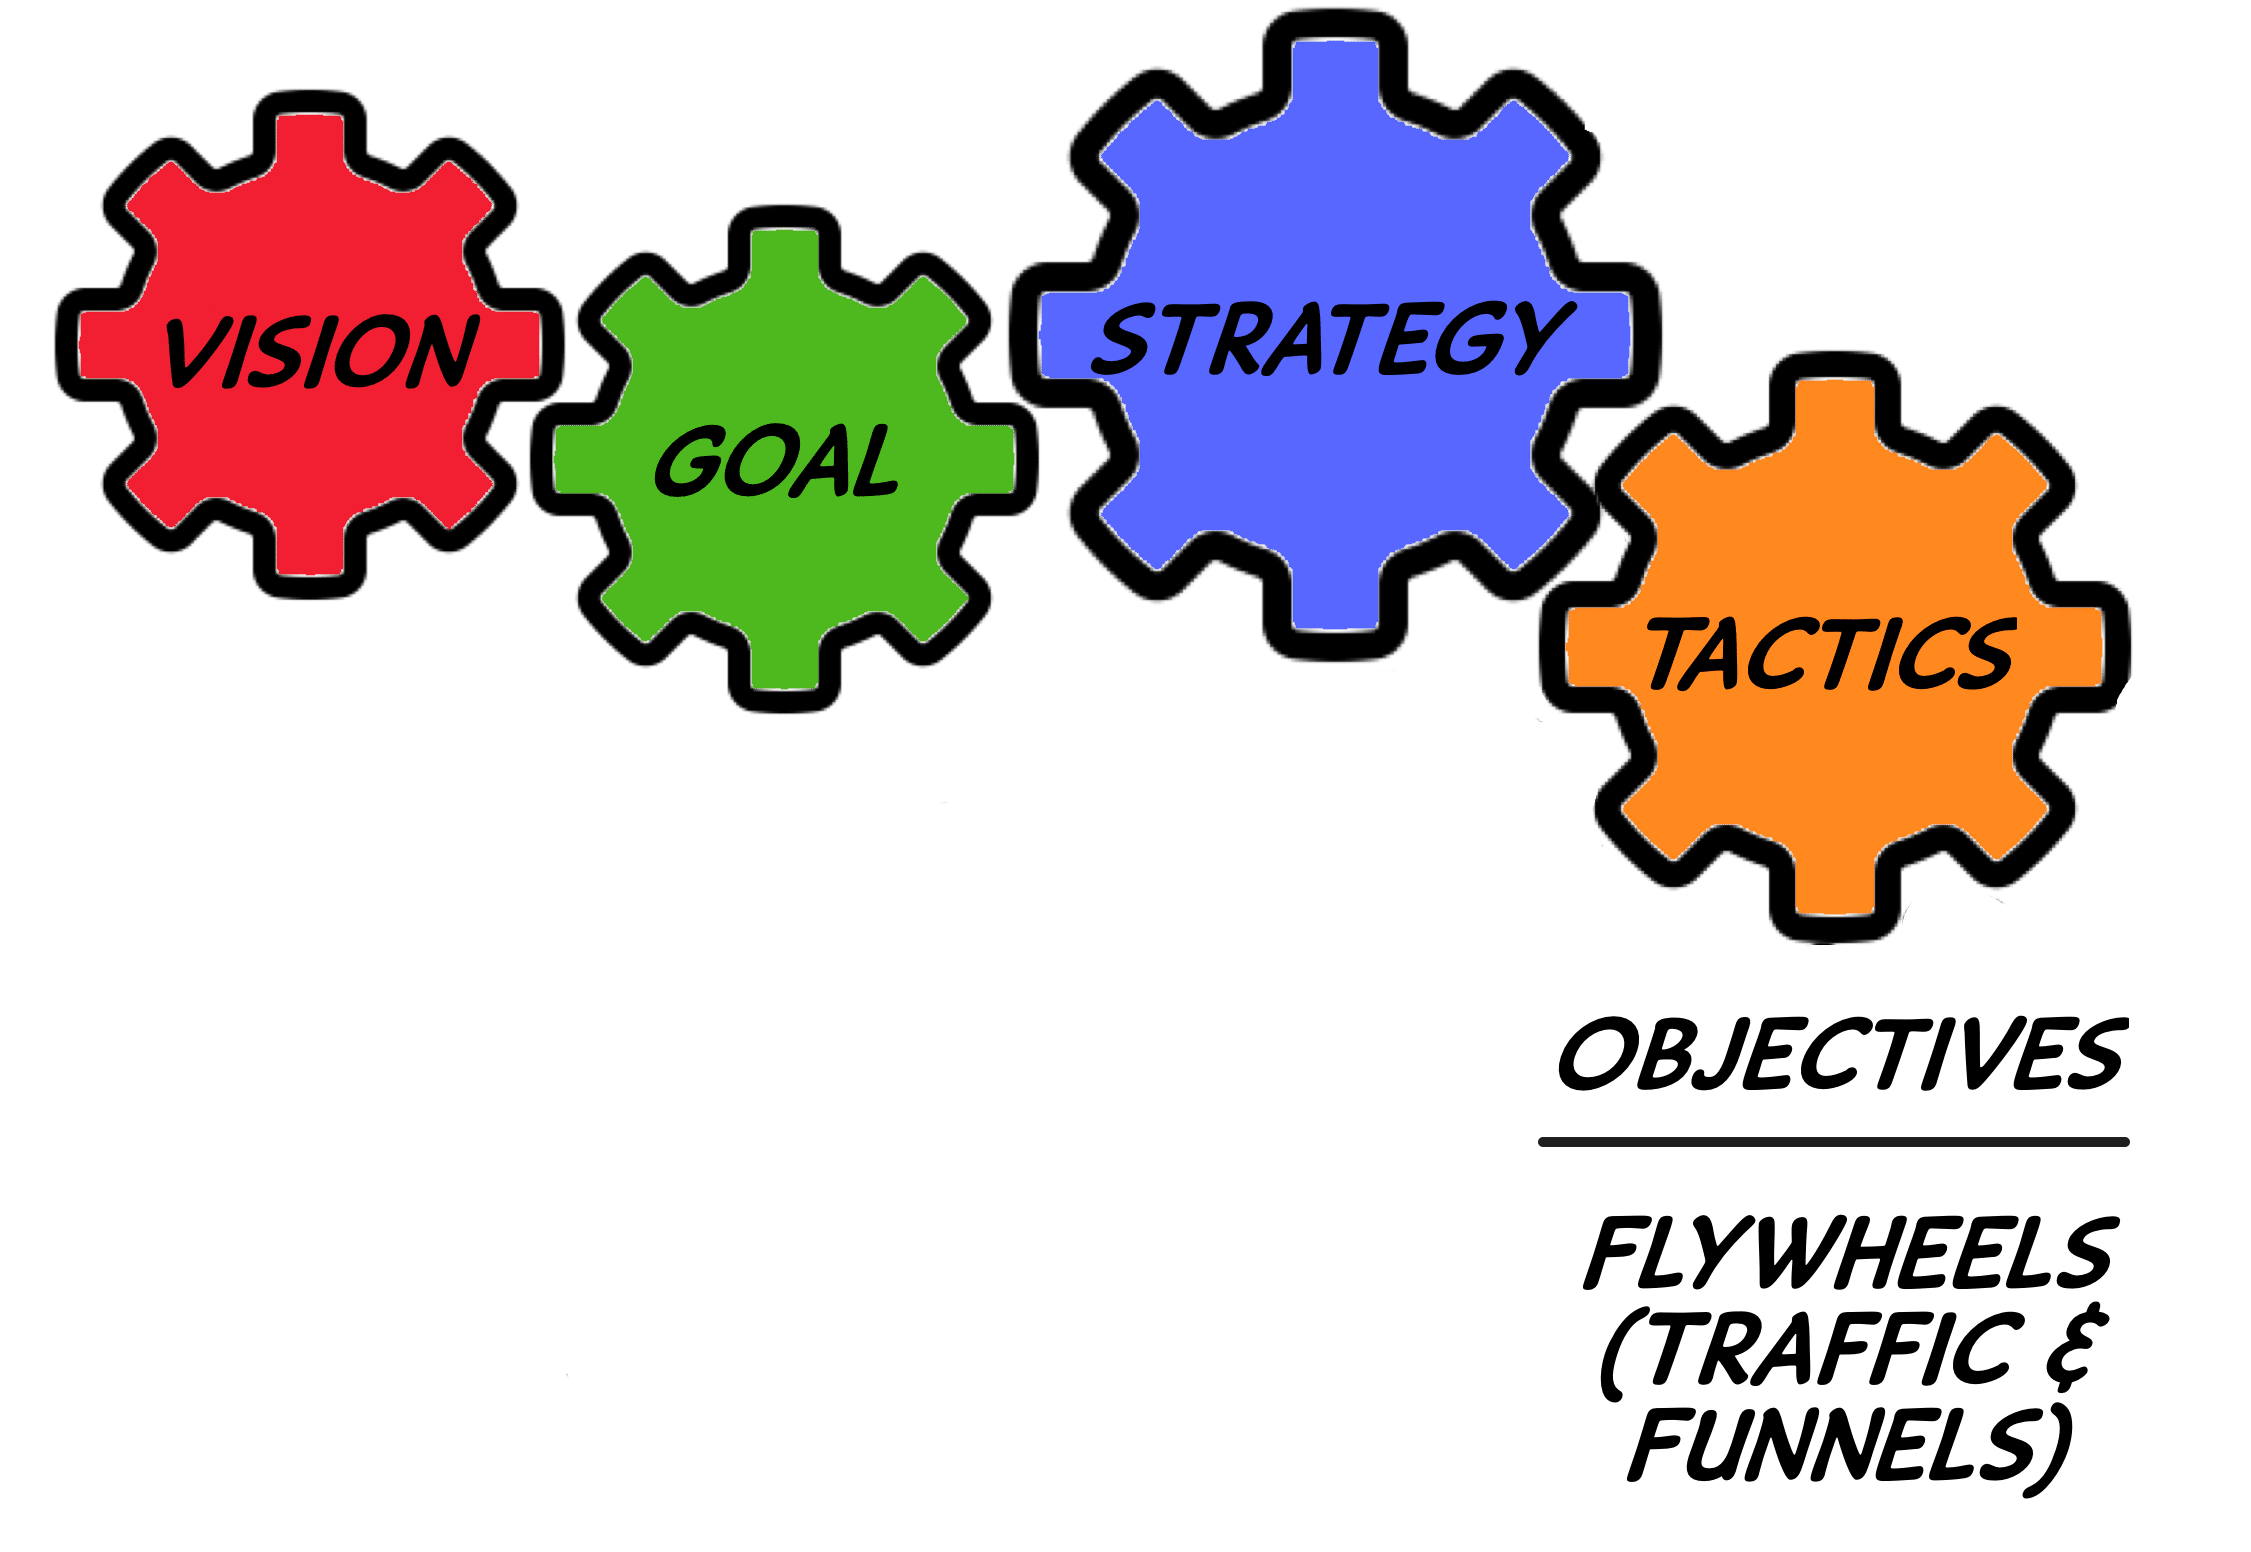 Tactics The Operational Side of Strategy